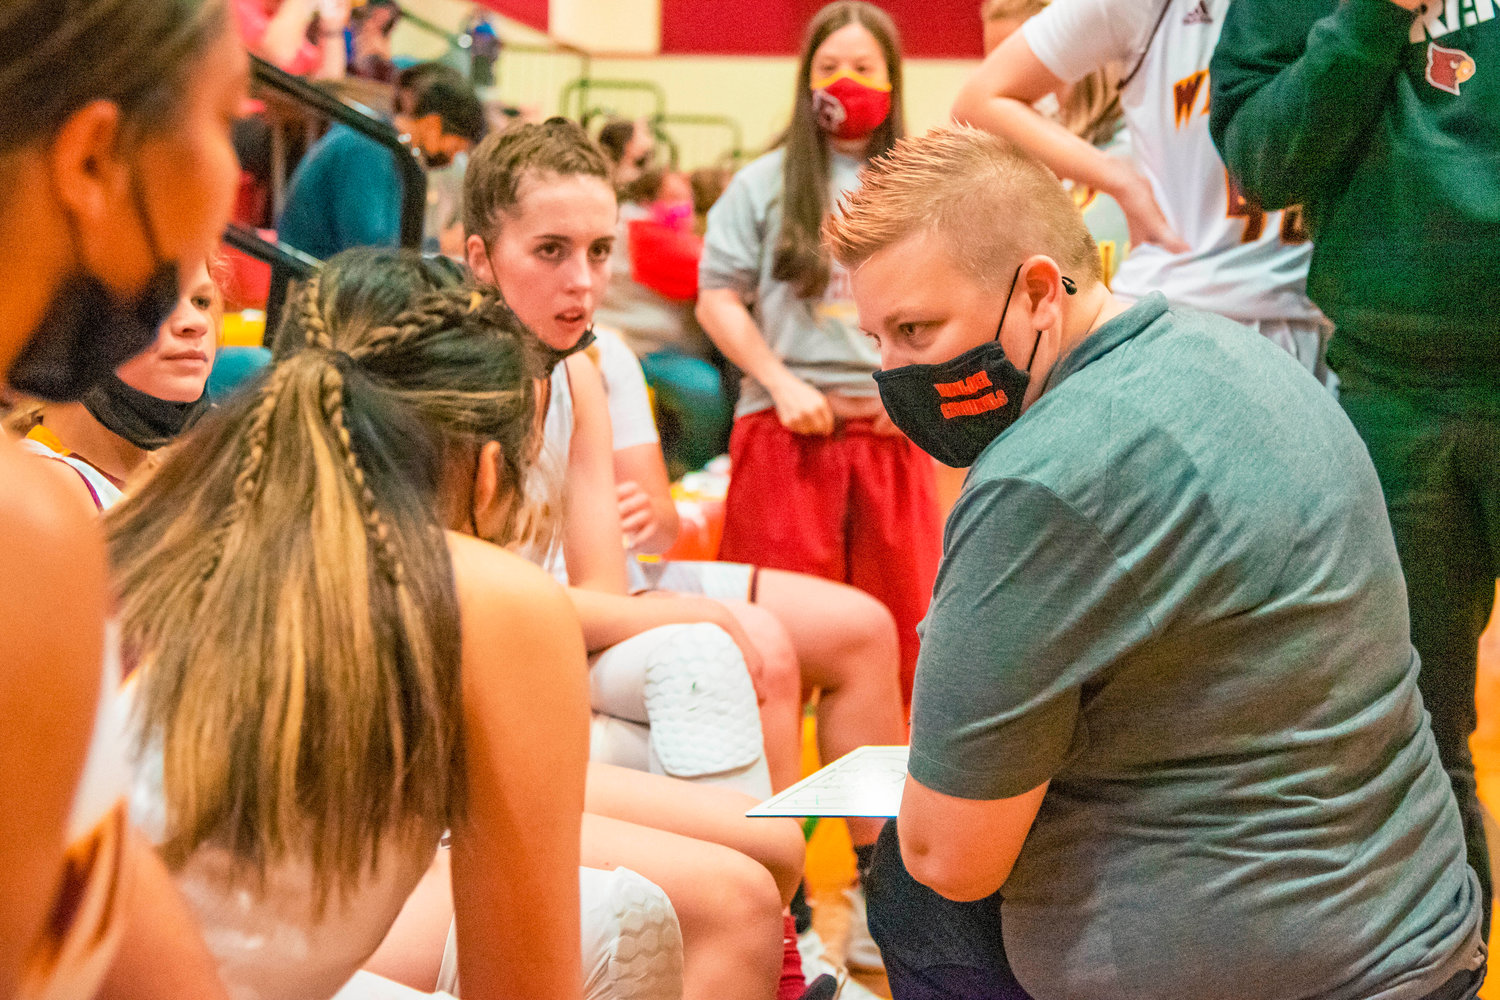 Winlock’s Head Coach Tori Nelson talks to players during a game on Thursday.